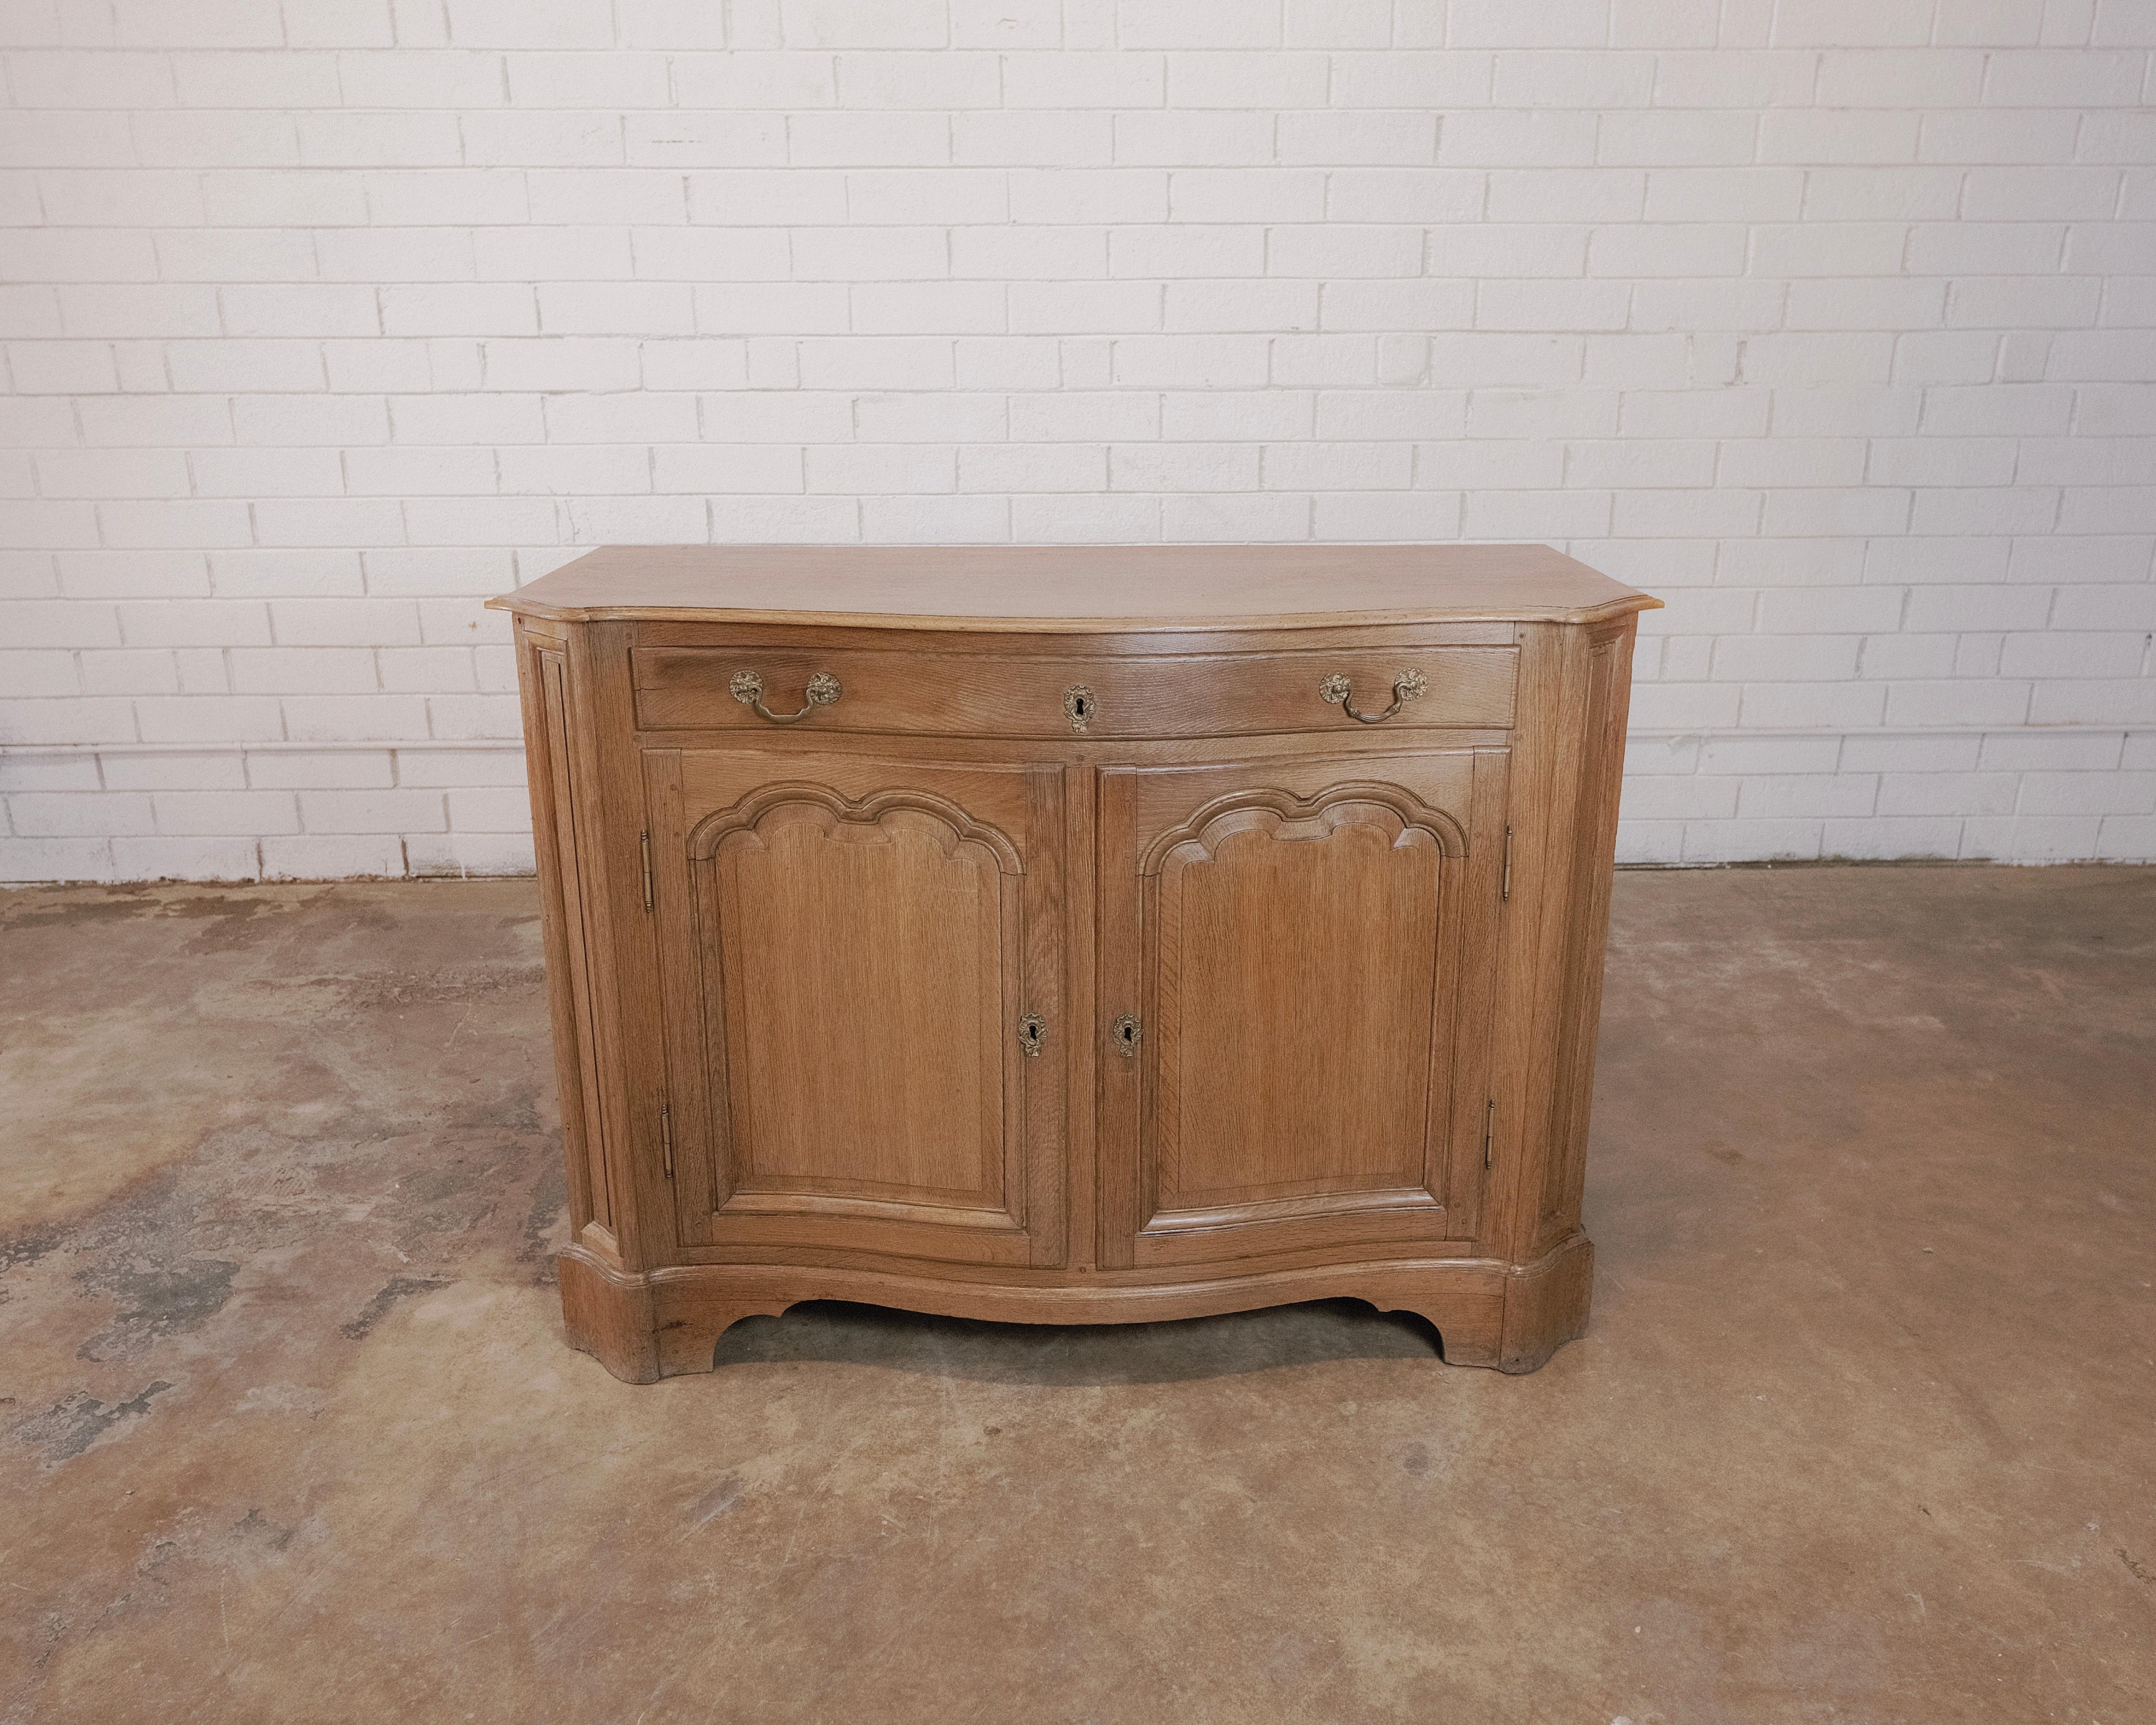 Step into the elegance of the Early 19th Century with this exquisite French sideboard, a true masterpiece of the neoclassical style that defined the era. This sideboard represents not just a piece of furniture but a portal to a bygone time, where